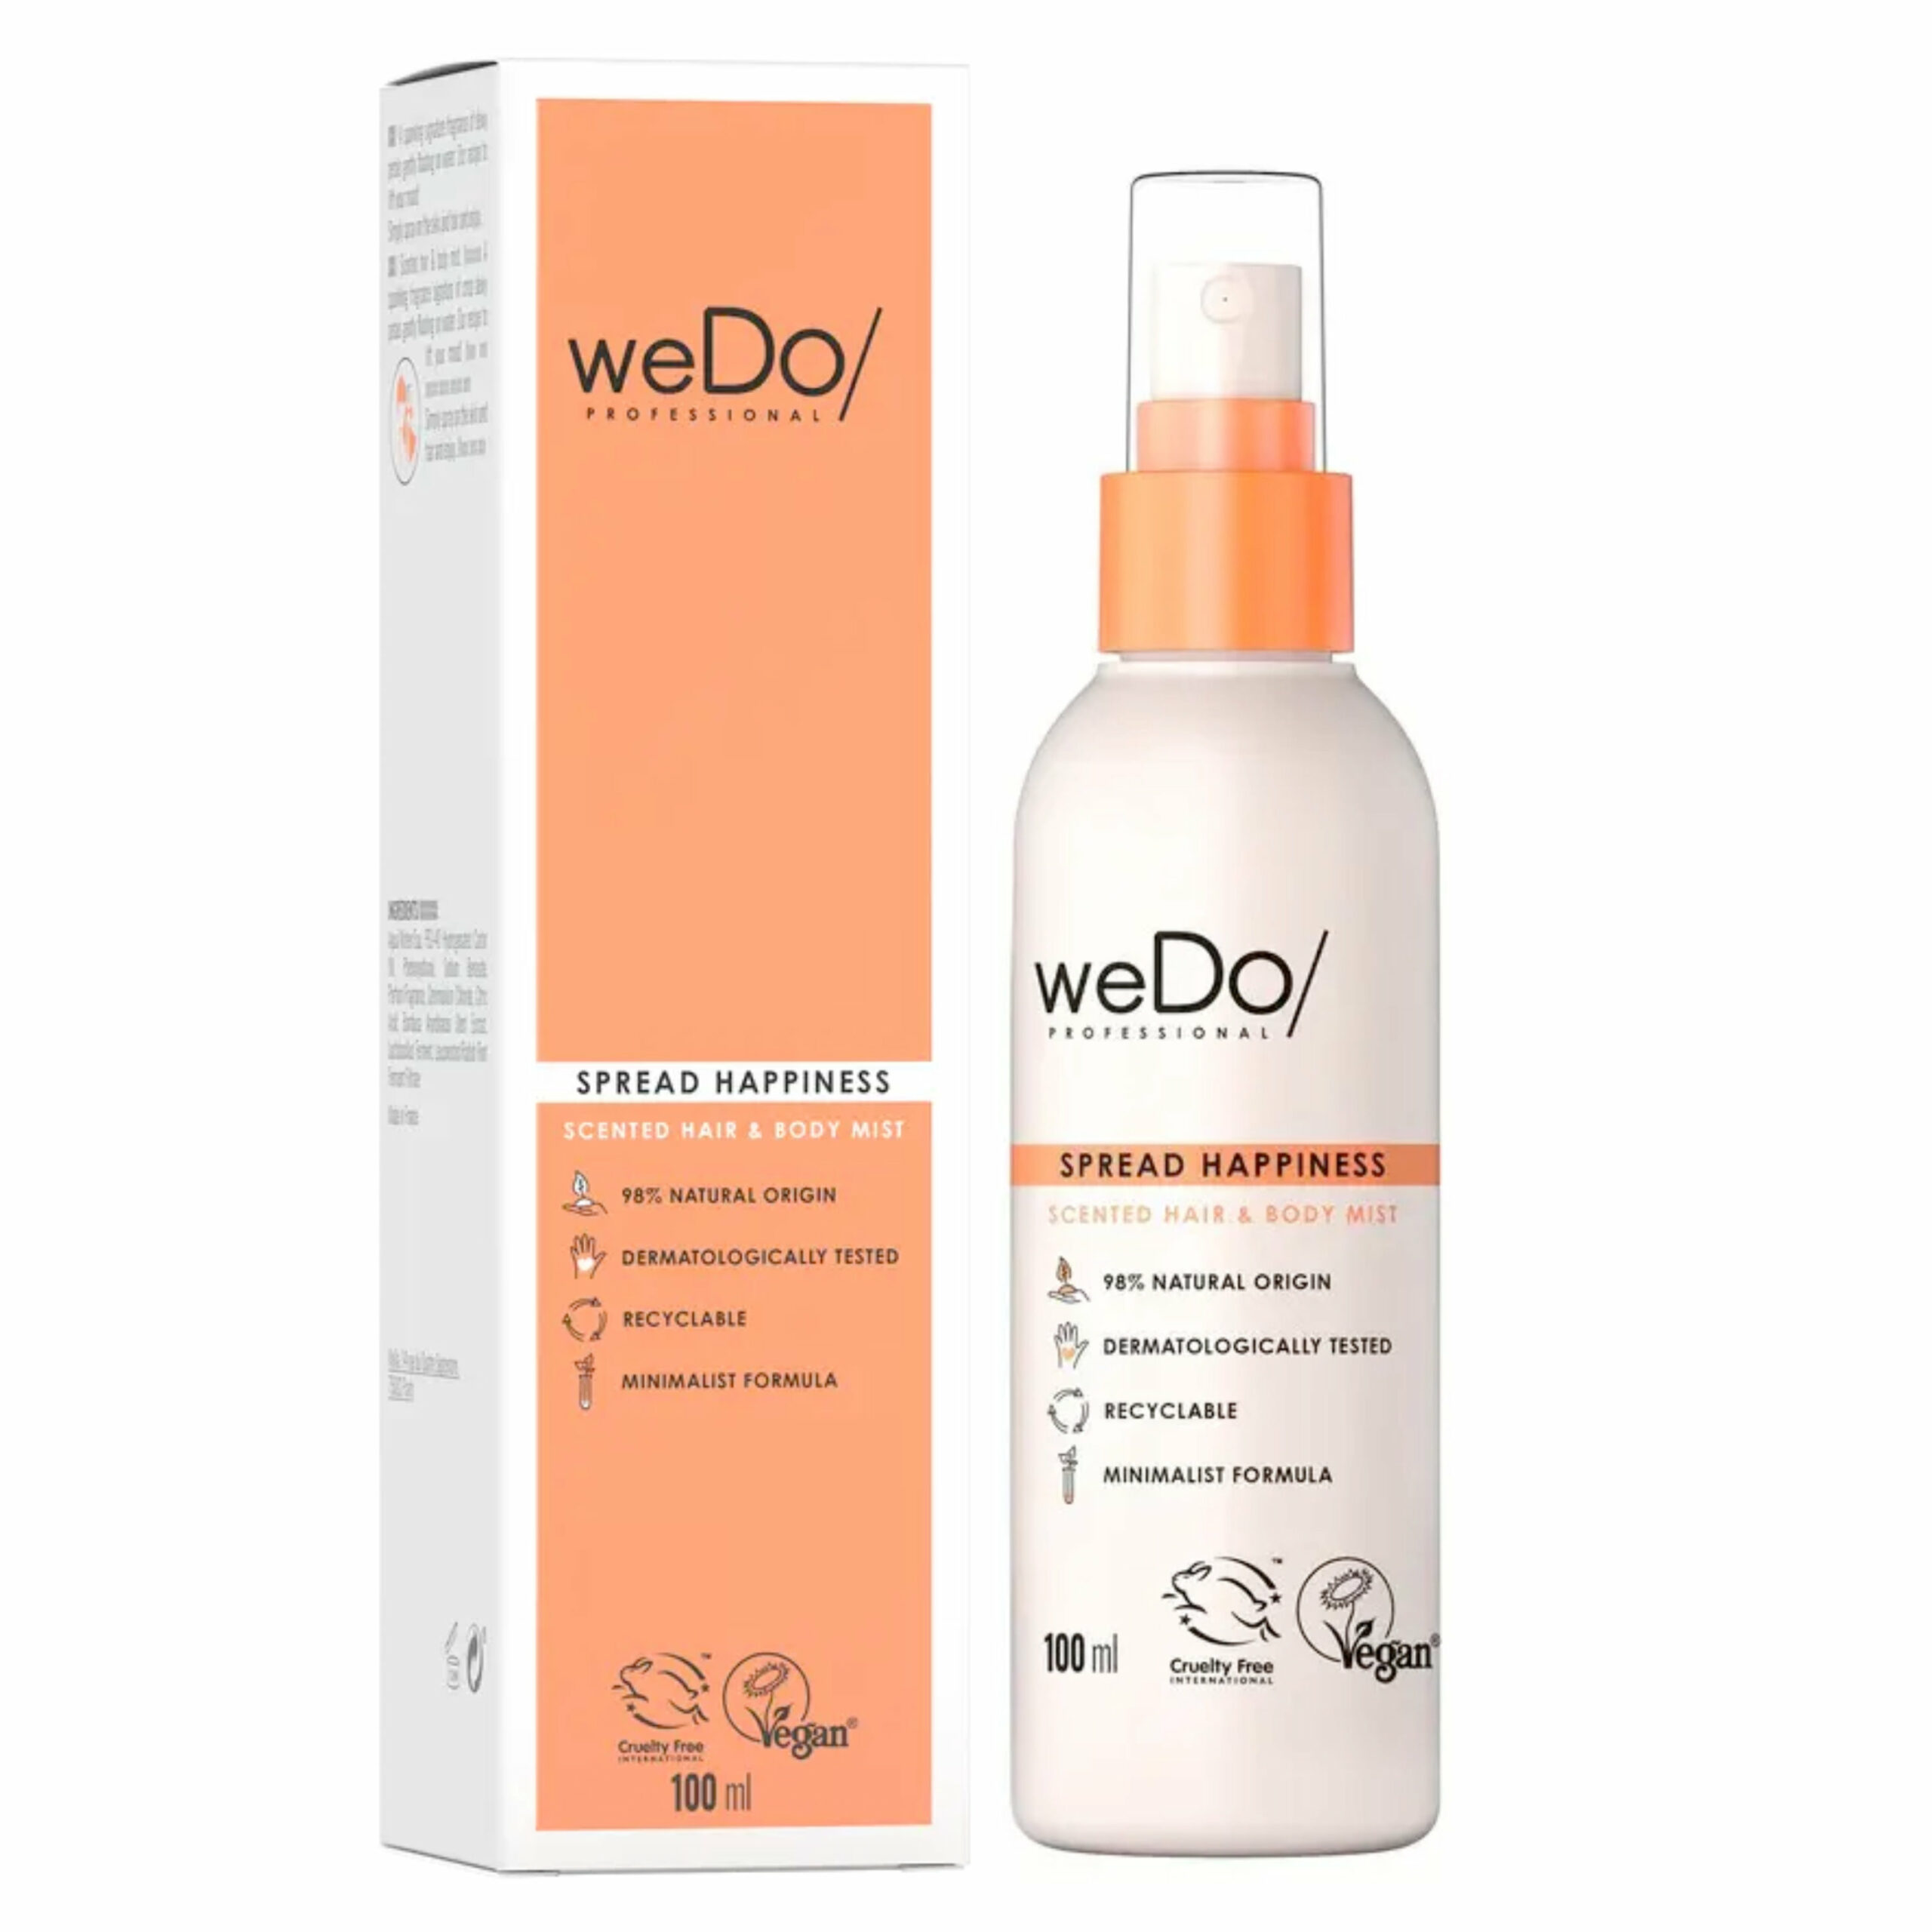 weDo Professional Spread Happiness Scented Hair & Body Mist 100 ml